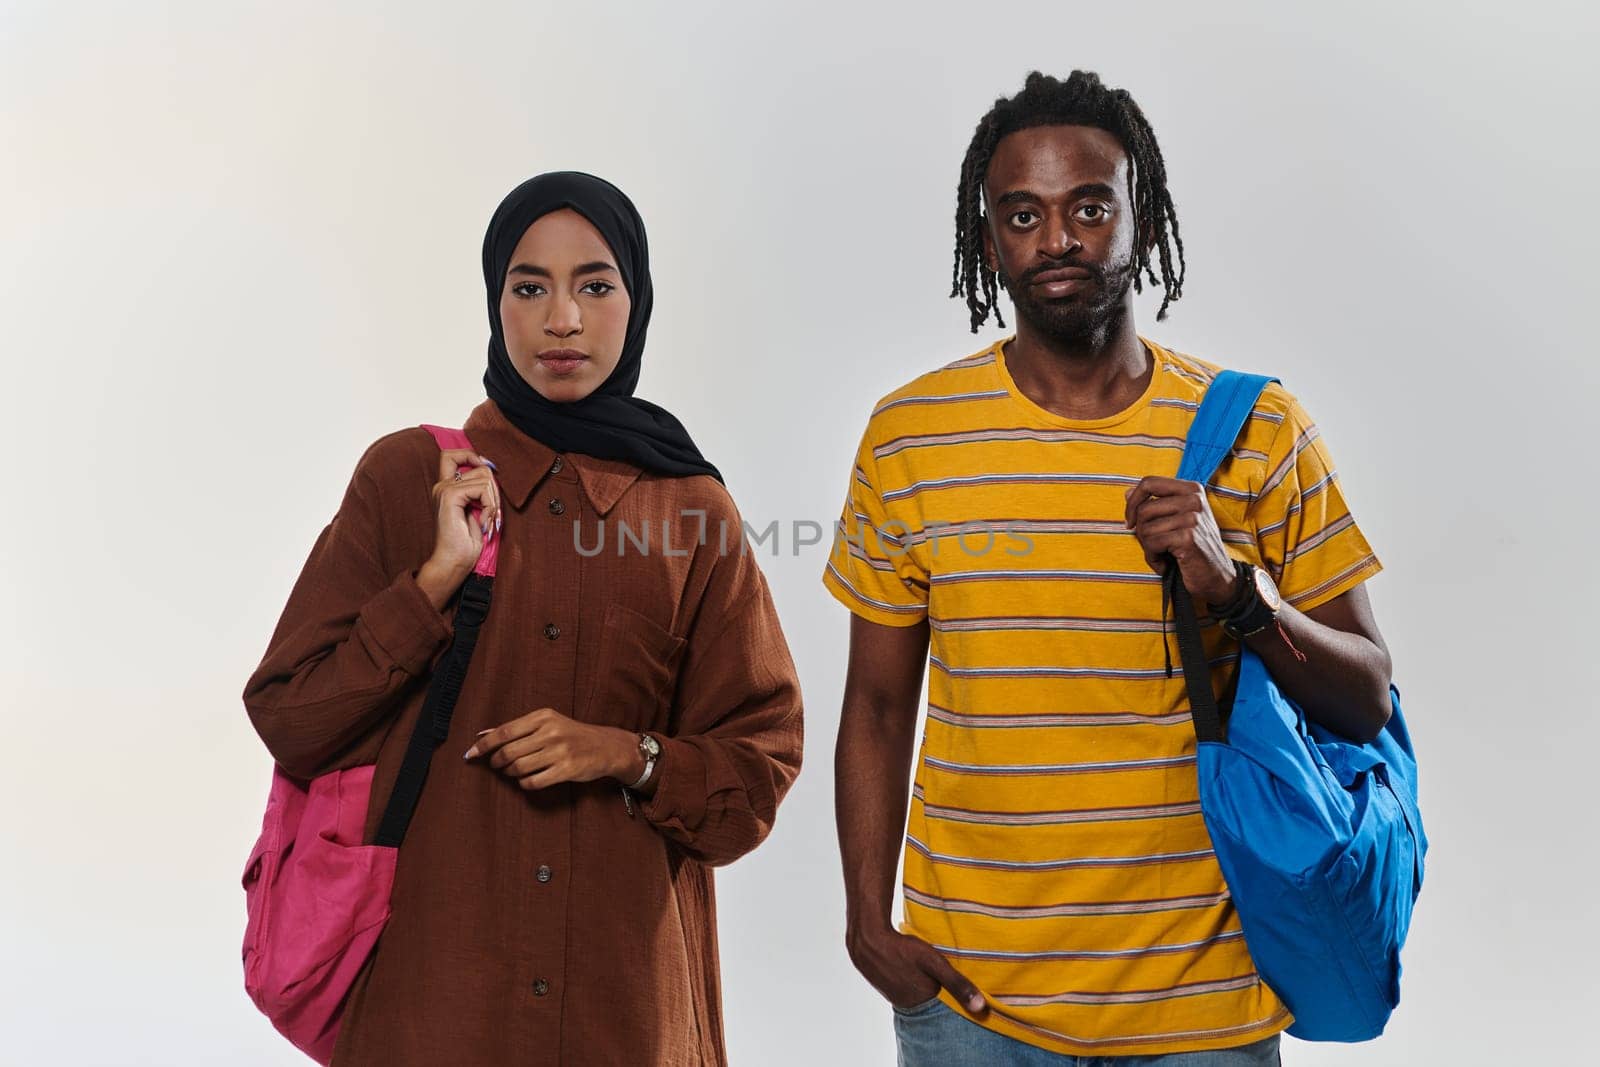 Against a clean white background, two students, an African American young man and a hijab-wearing woman, collaboratively use laptops in a display of technological empowerment and inclusive education, embodying the unity and diversity within the academic journey by dotshock